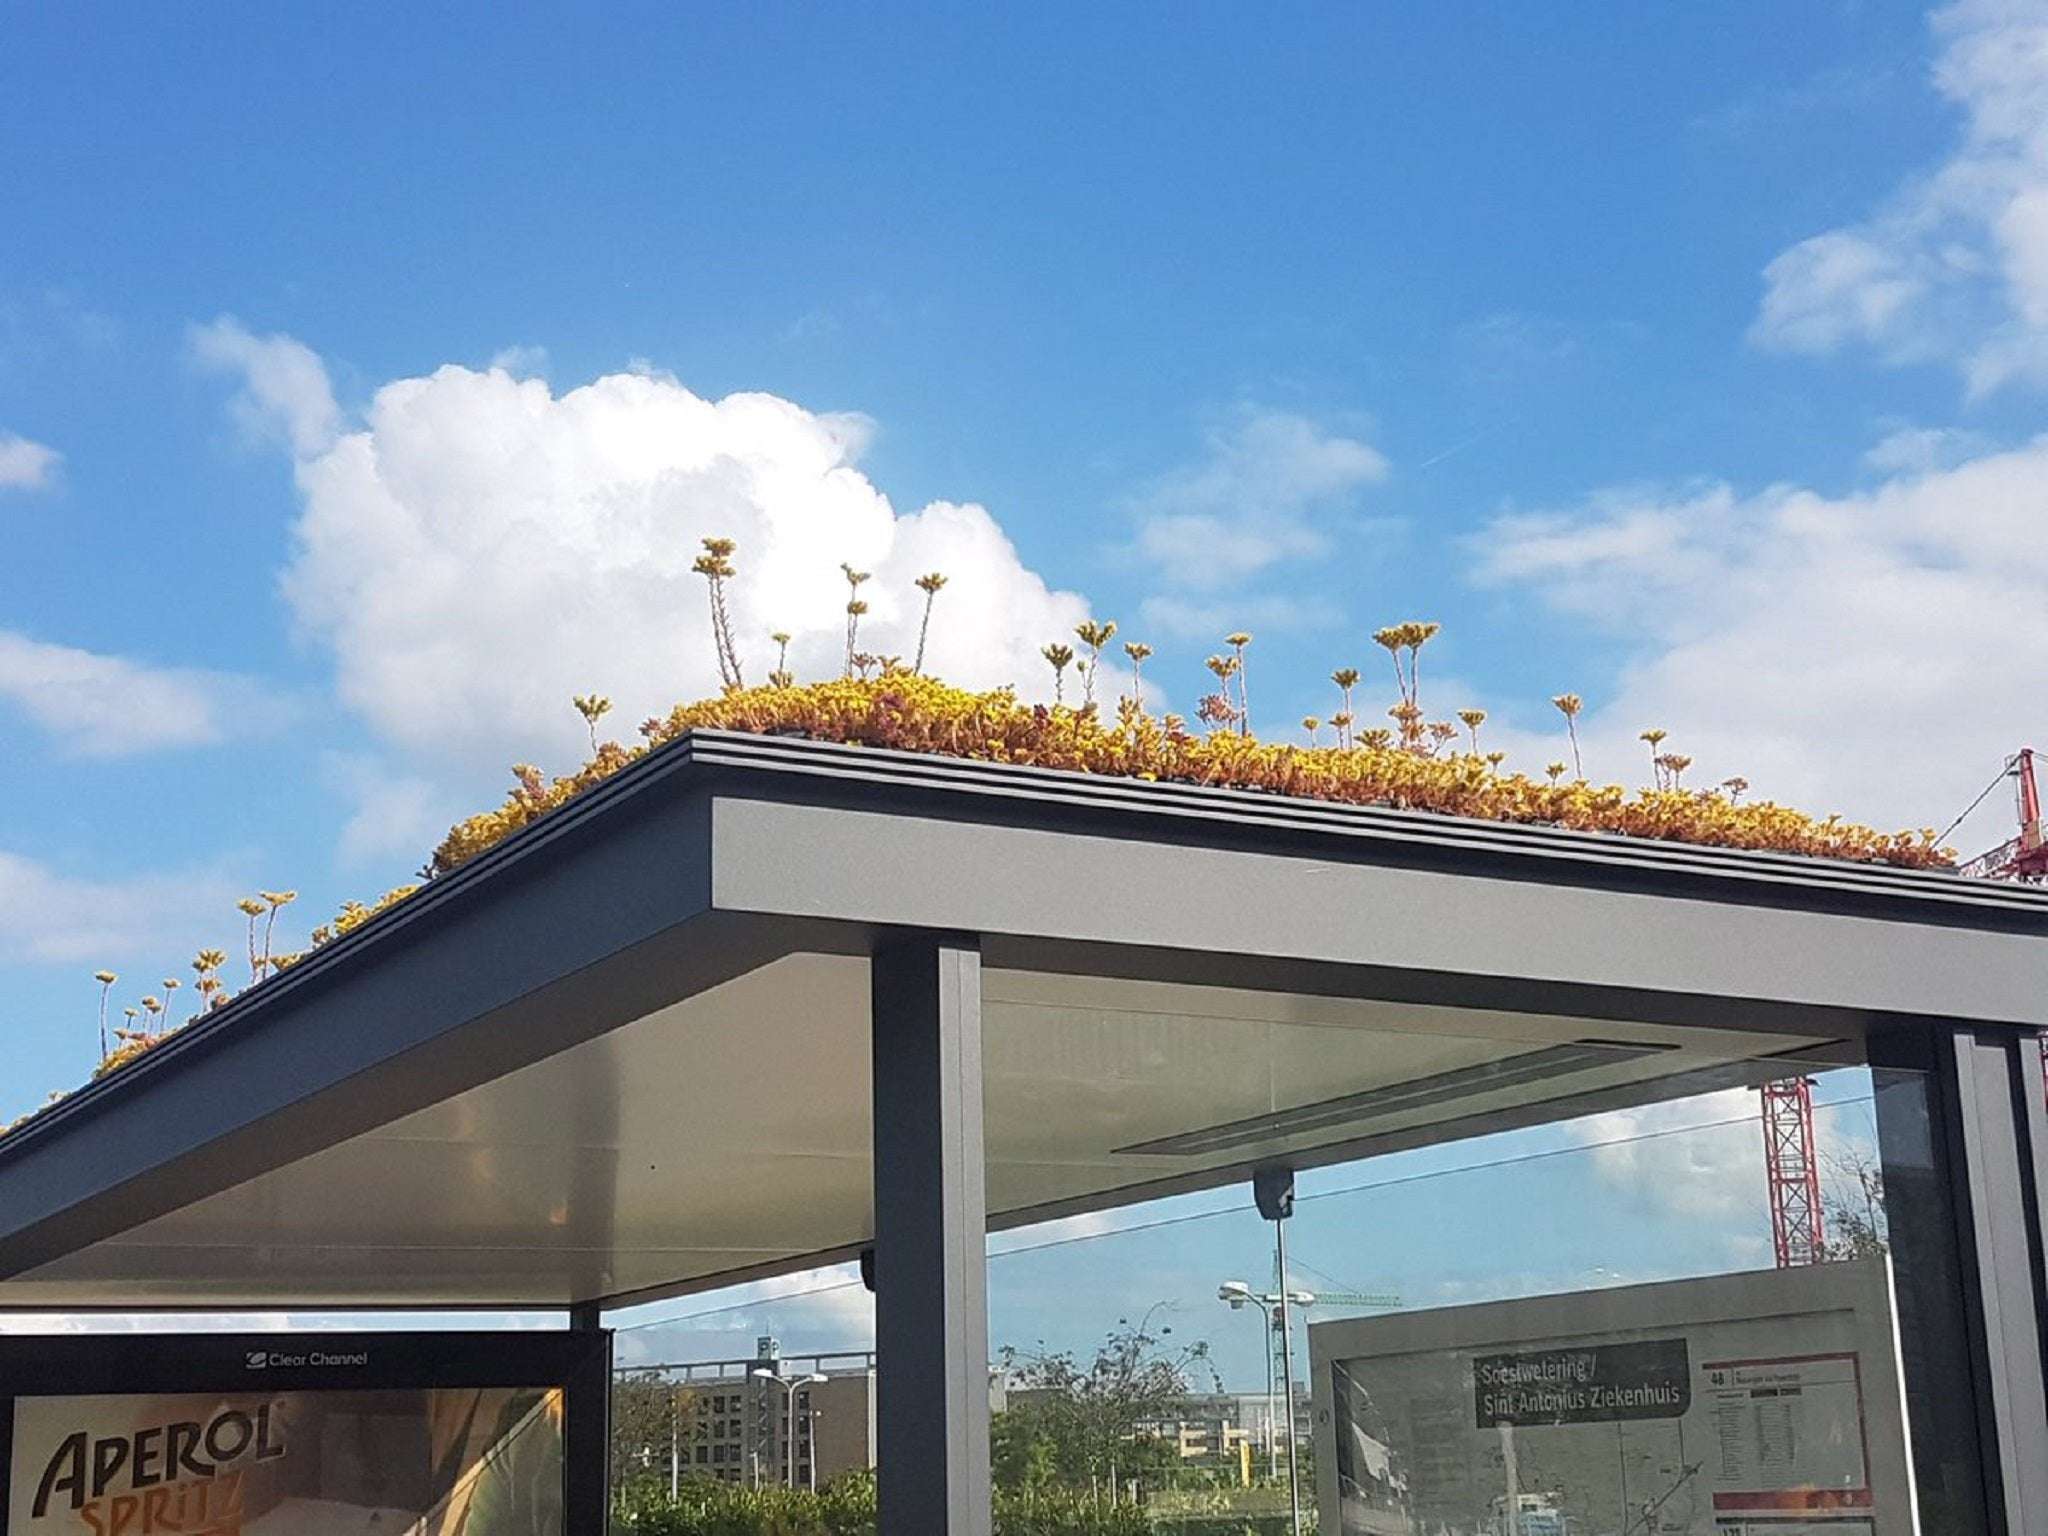 image for Holland covers hundreds of bus stops with plants as gift to honeybees